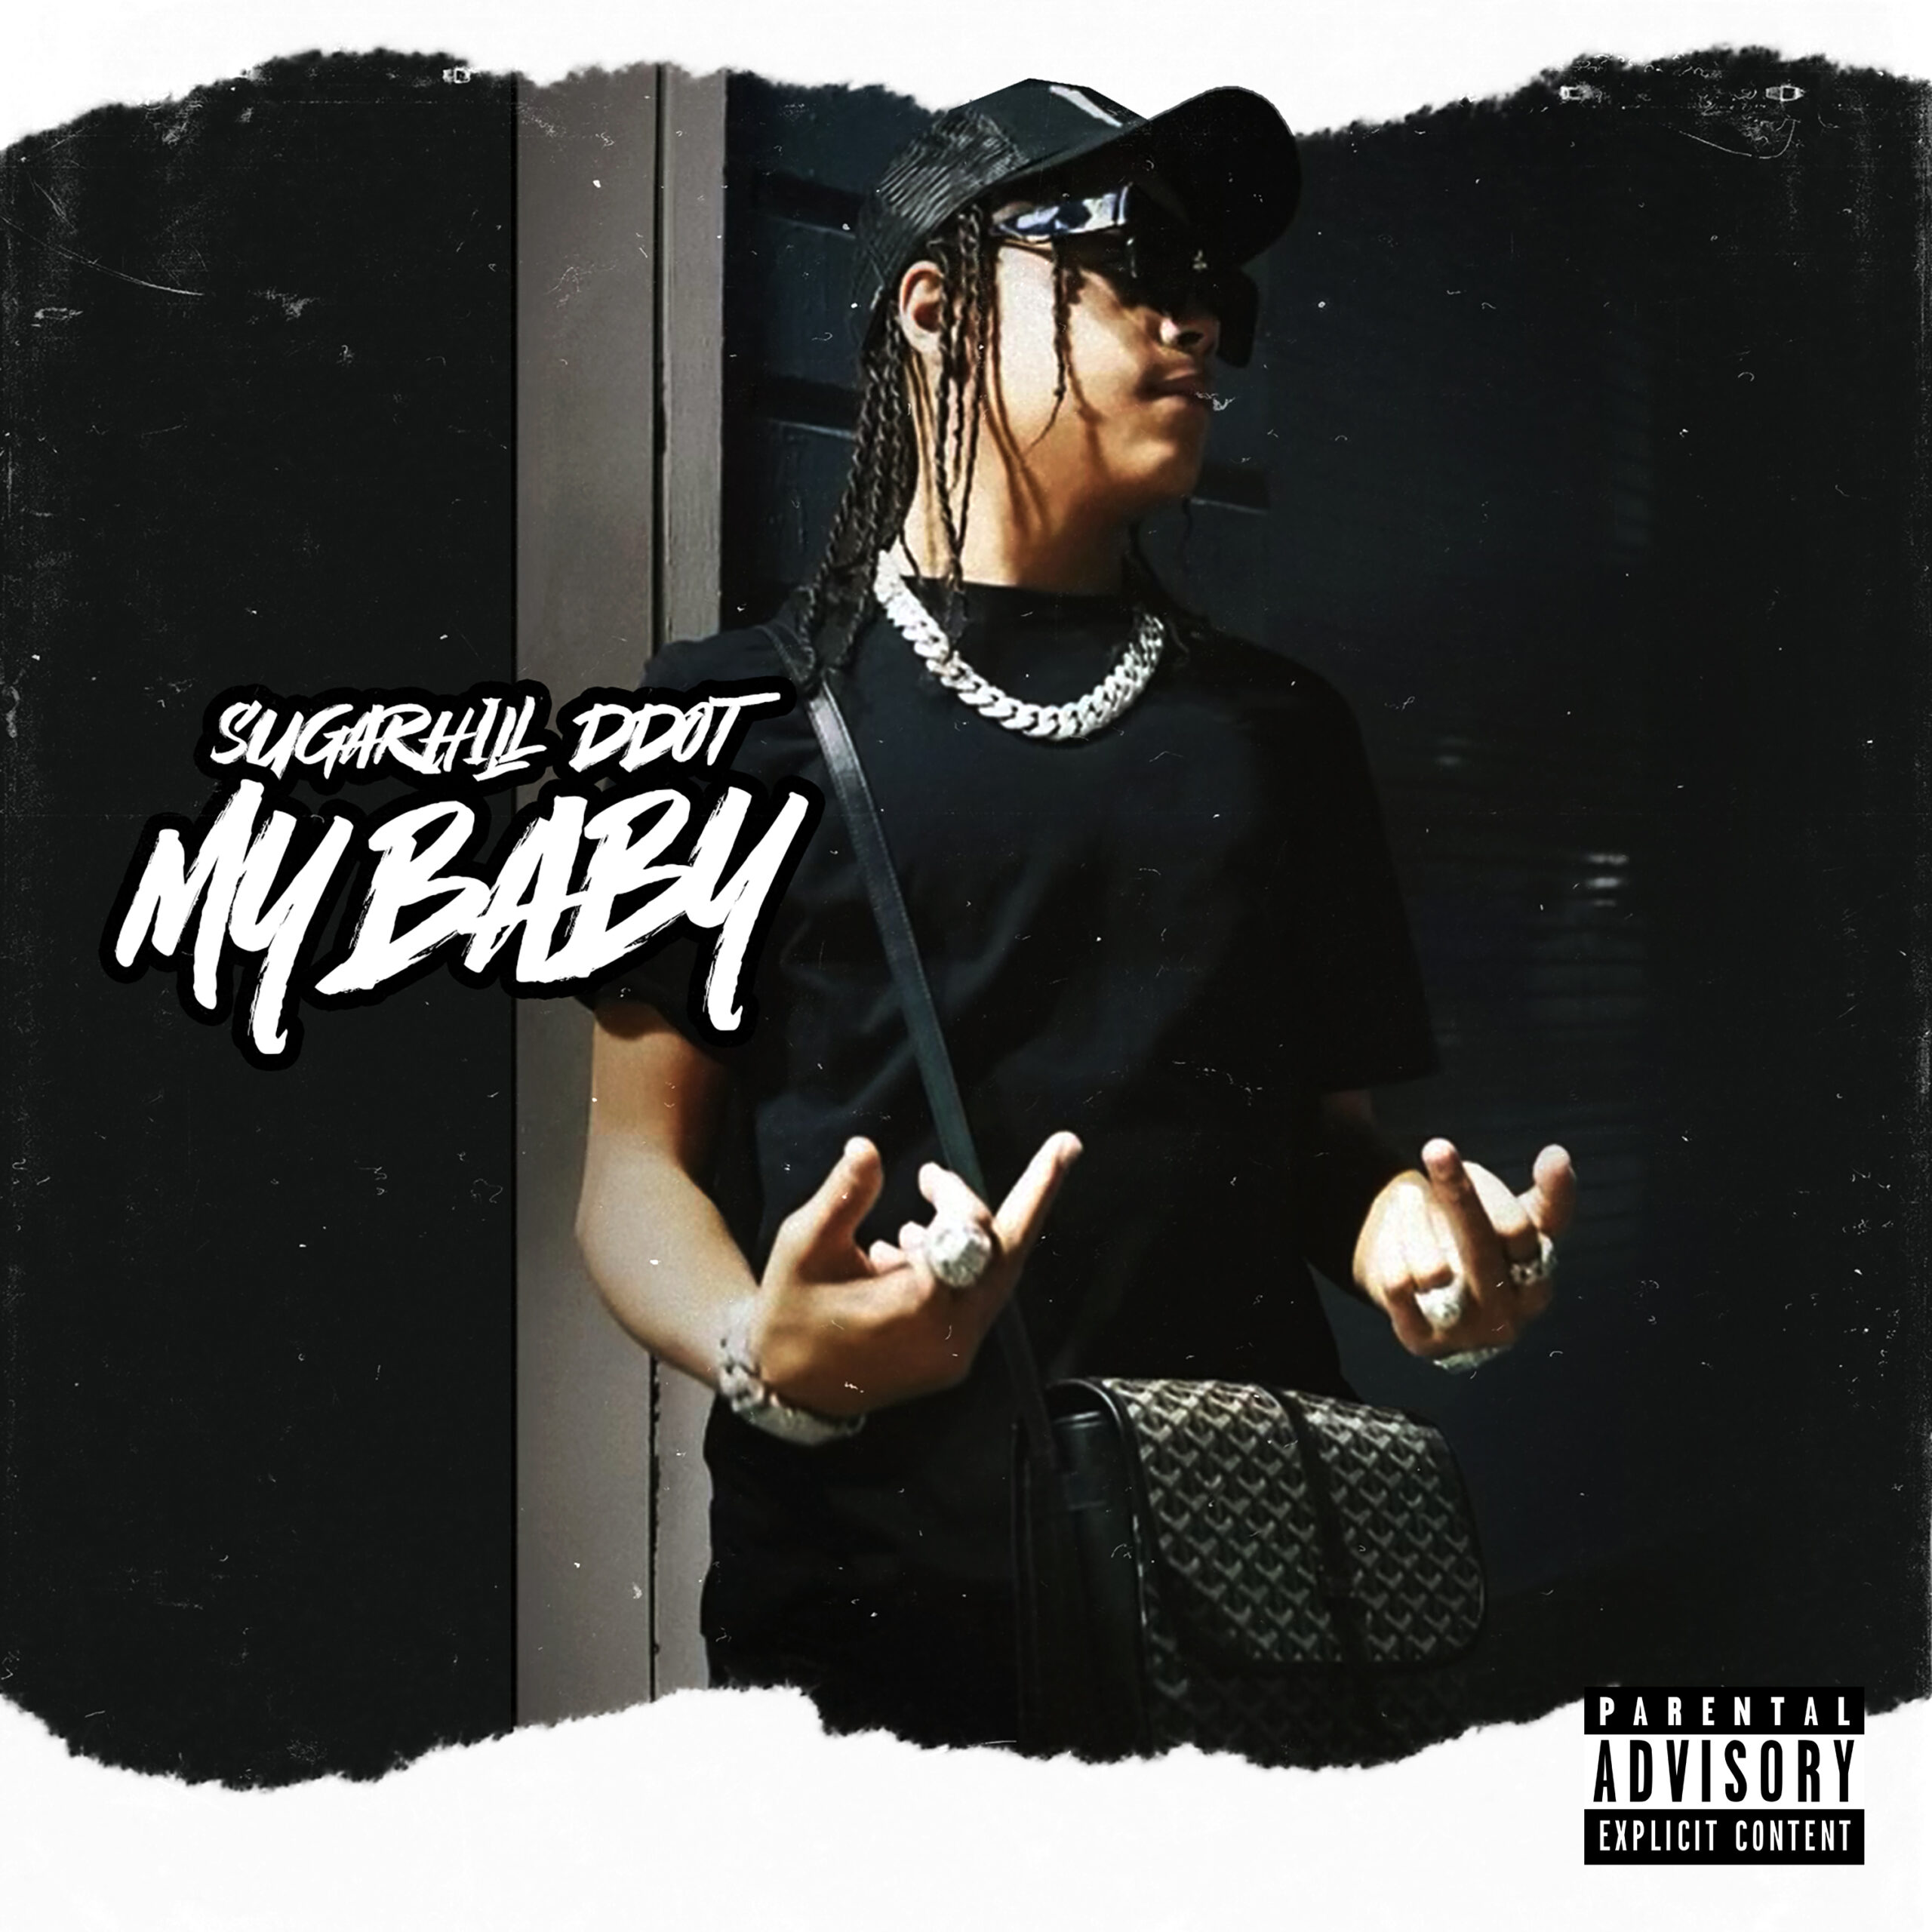 Sugarhill Ddot Releases New Single, "My Baby"